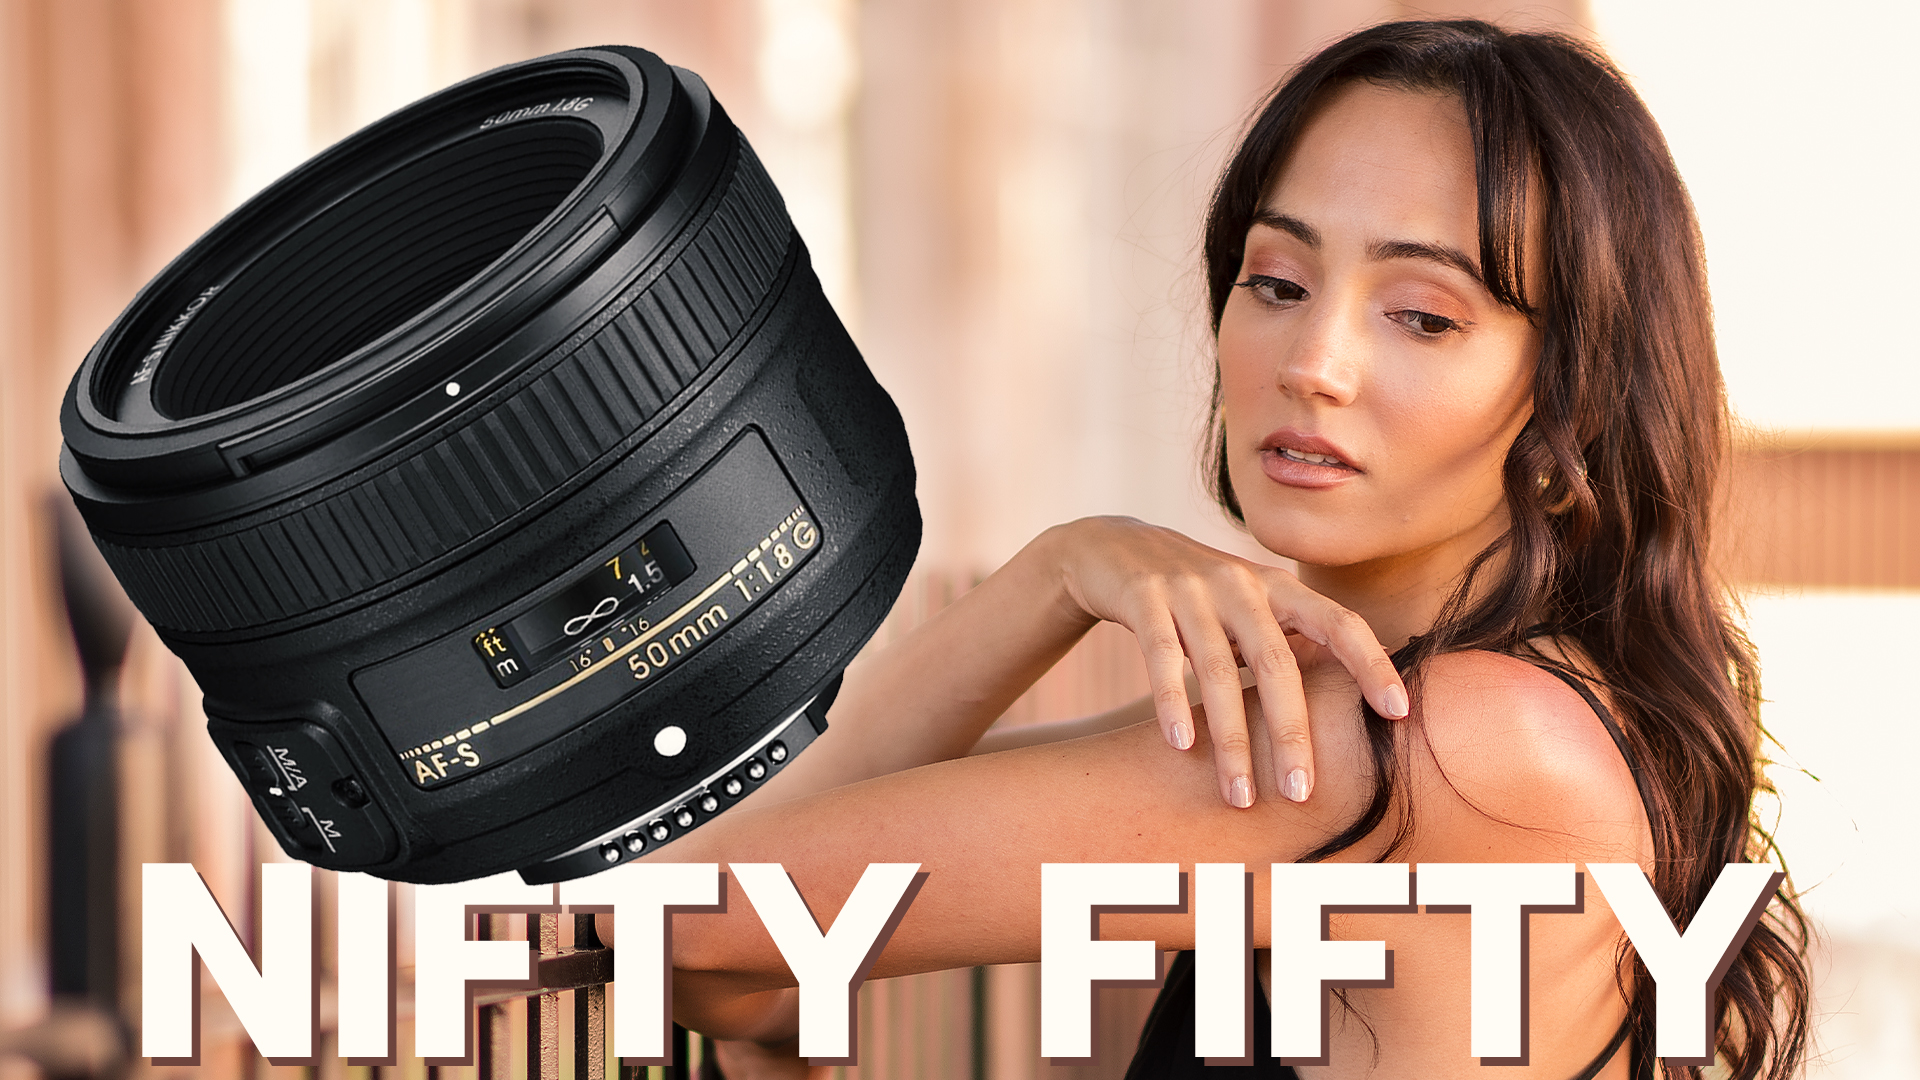 You are currently viewing 6 Reasons Why You Need a Nifty Fifty